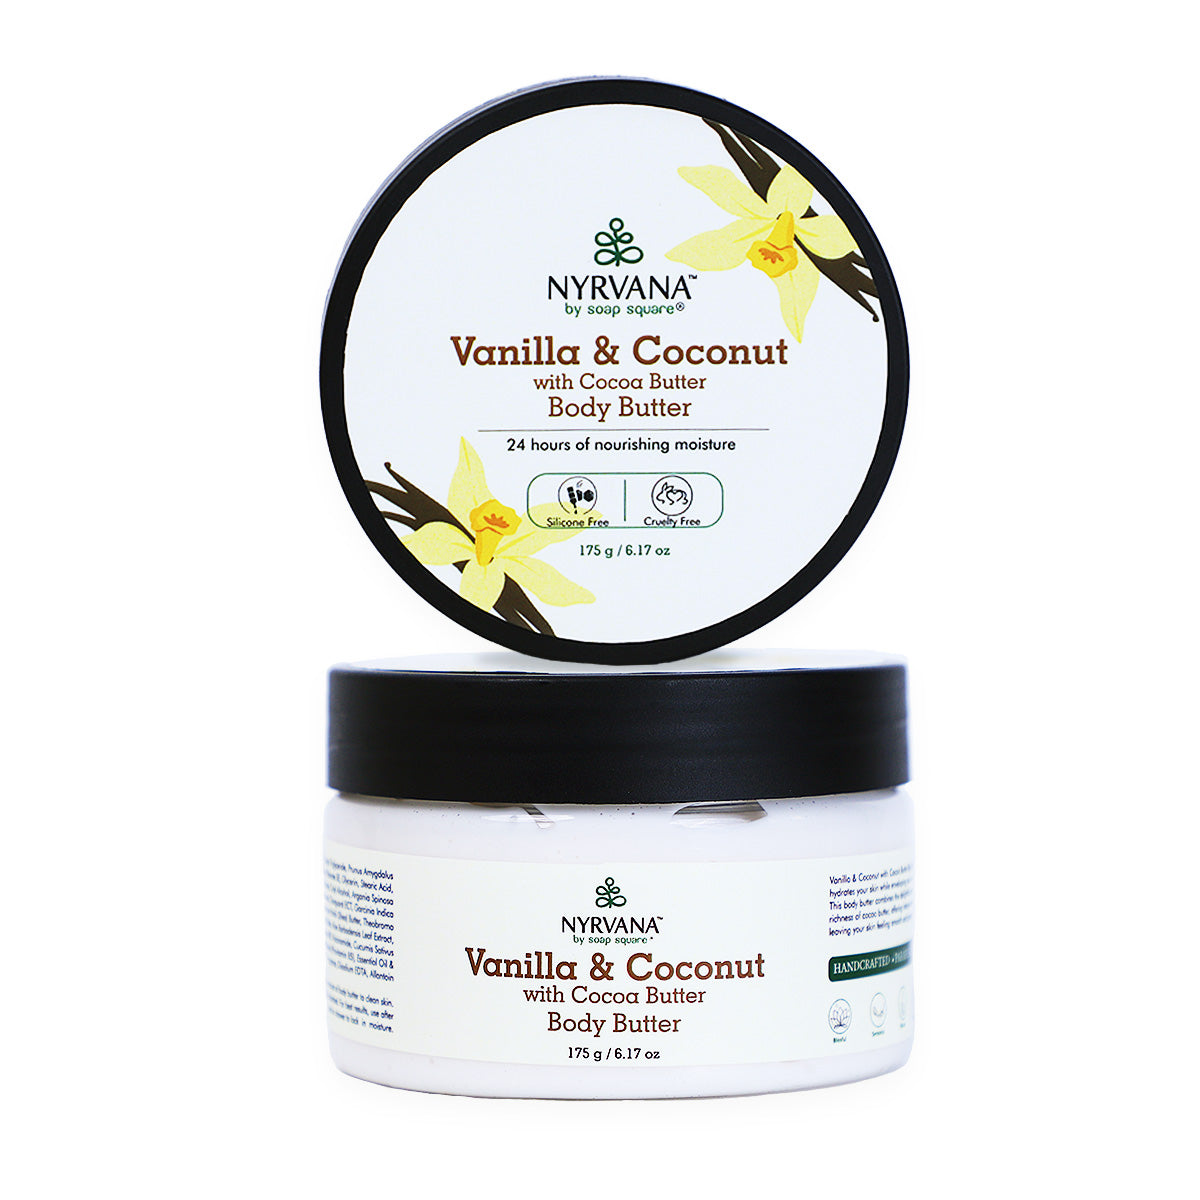 Vanilla & Coconut with Cocoa Butter Body Butter